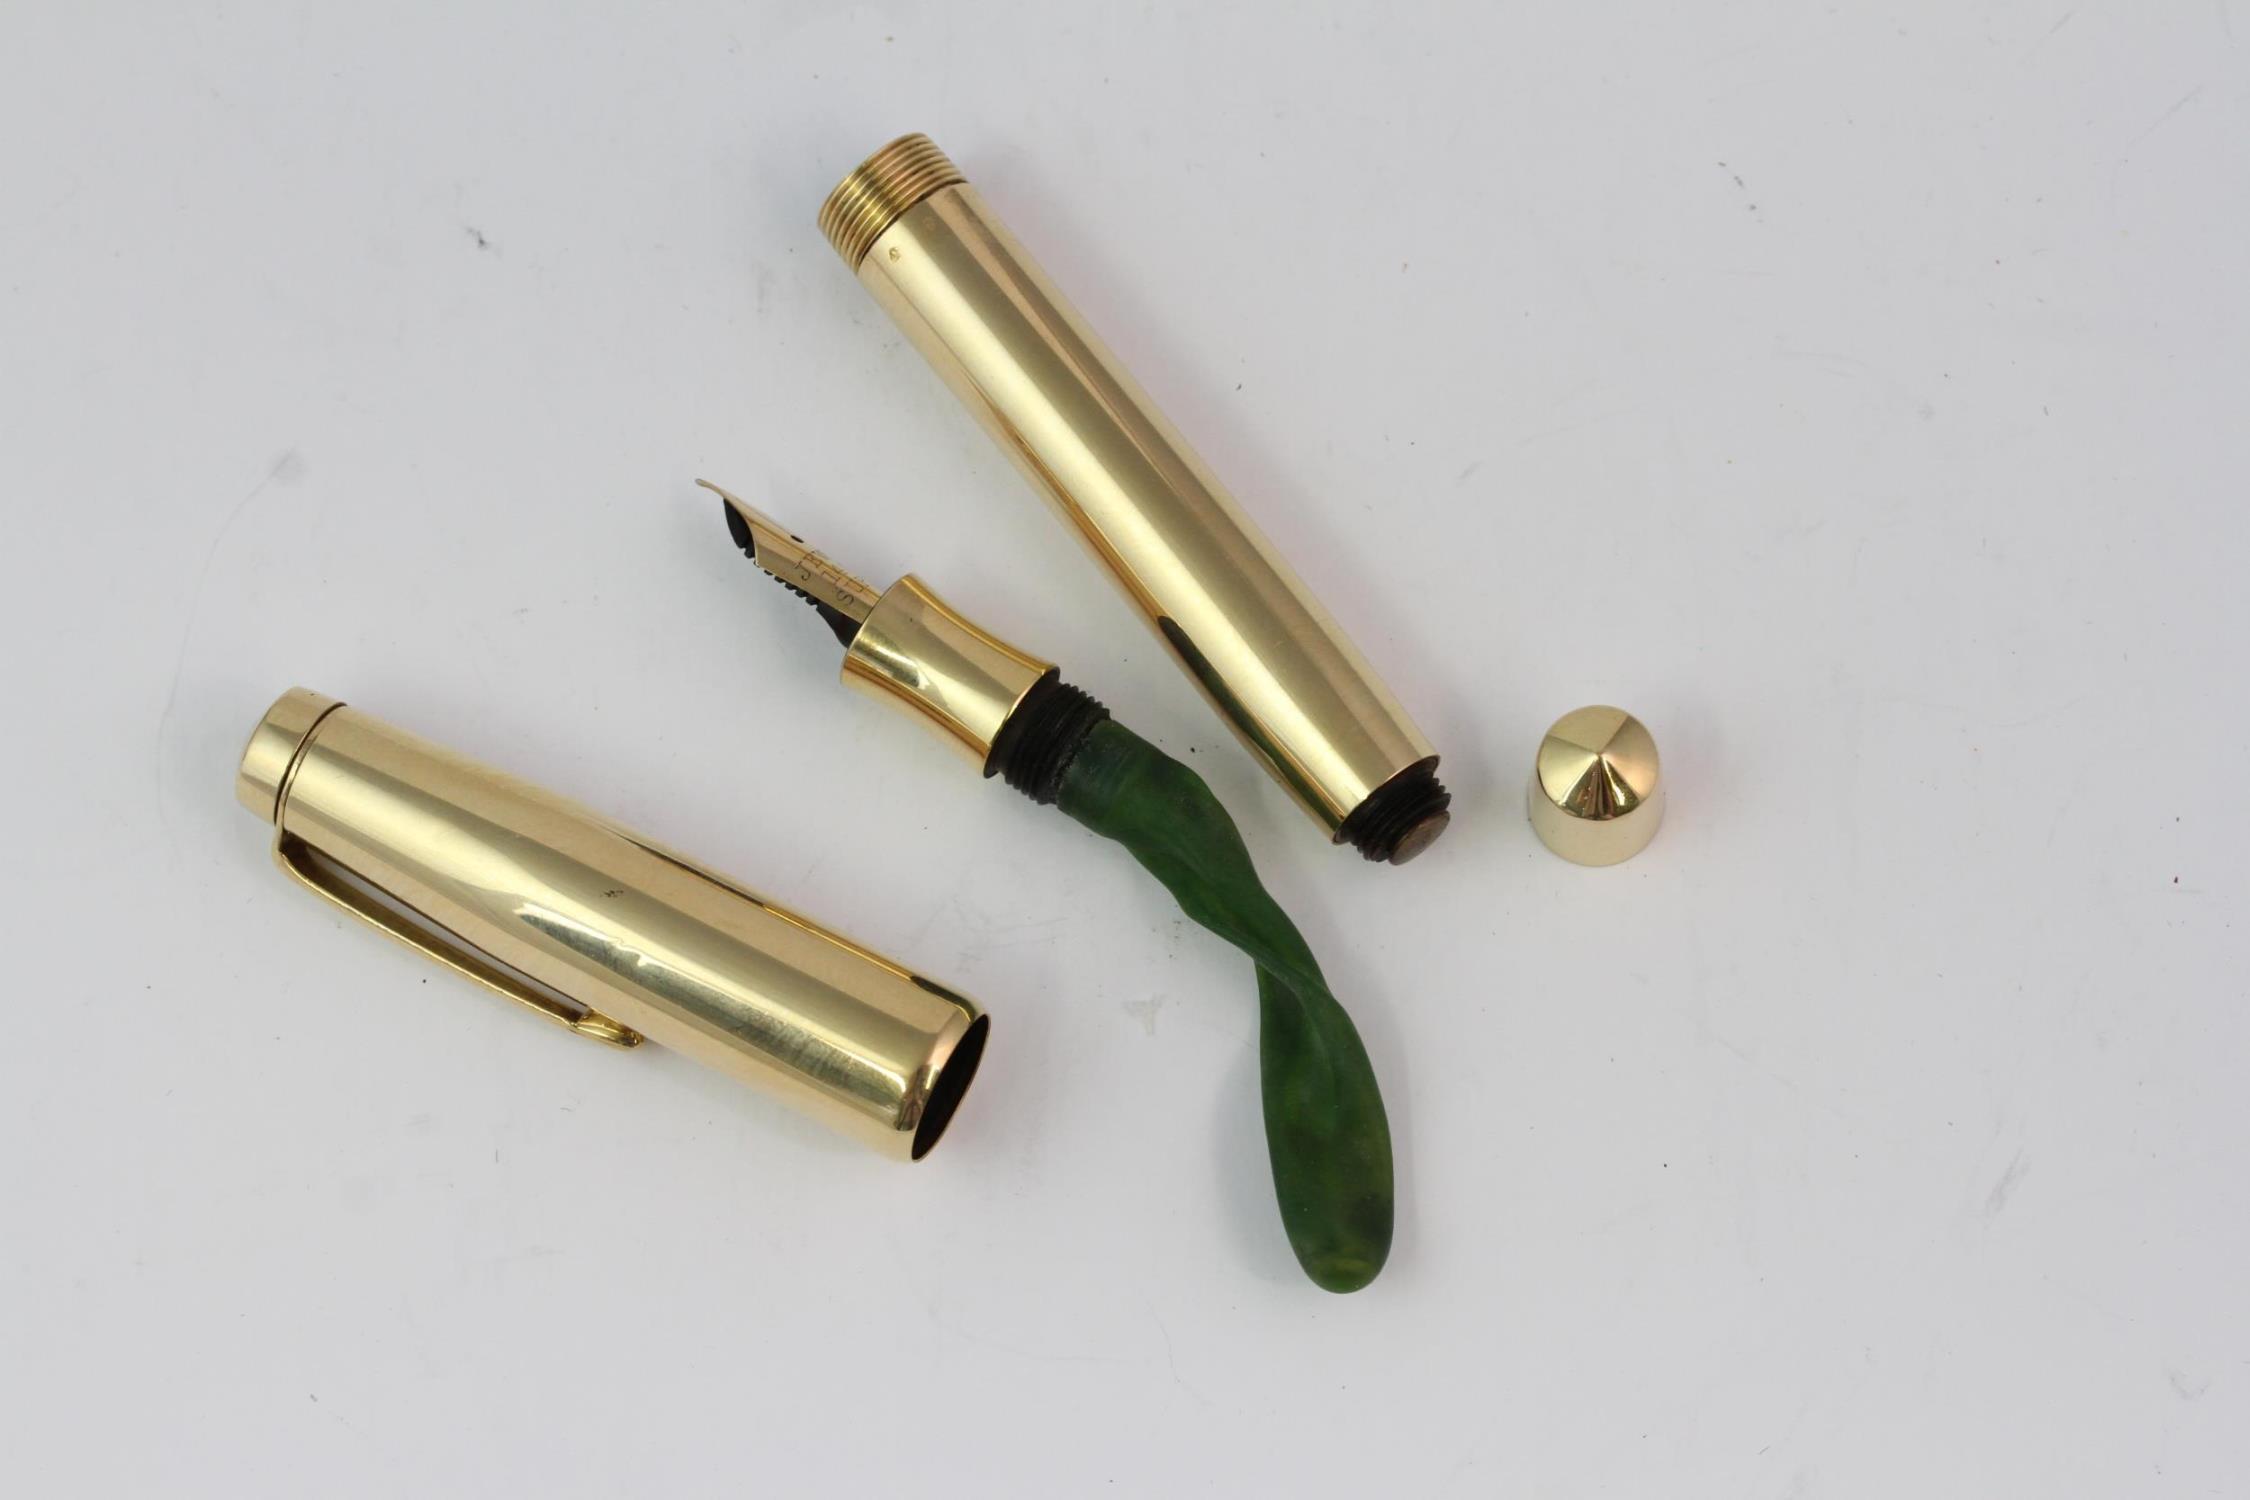 Rare Cartier French Fountain Pen 18K, Cartier Yellow Gold Pen from the 1930s, comes with the - Image 3 of 5